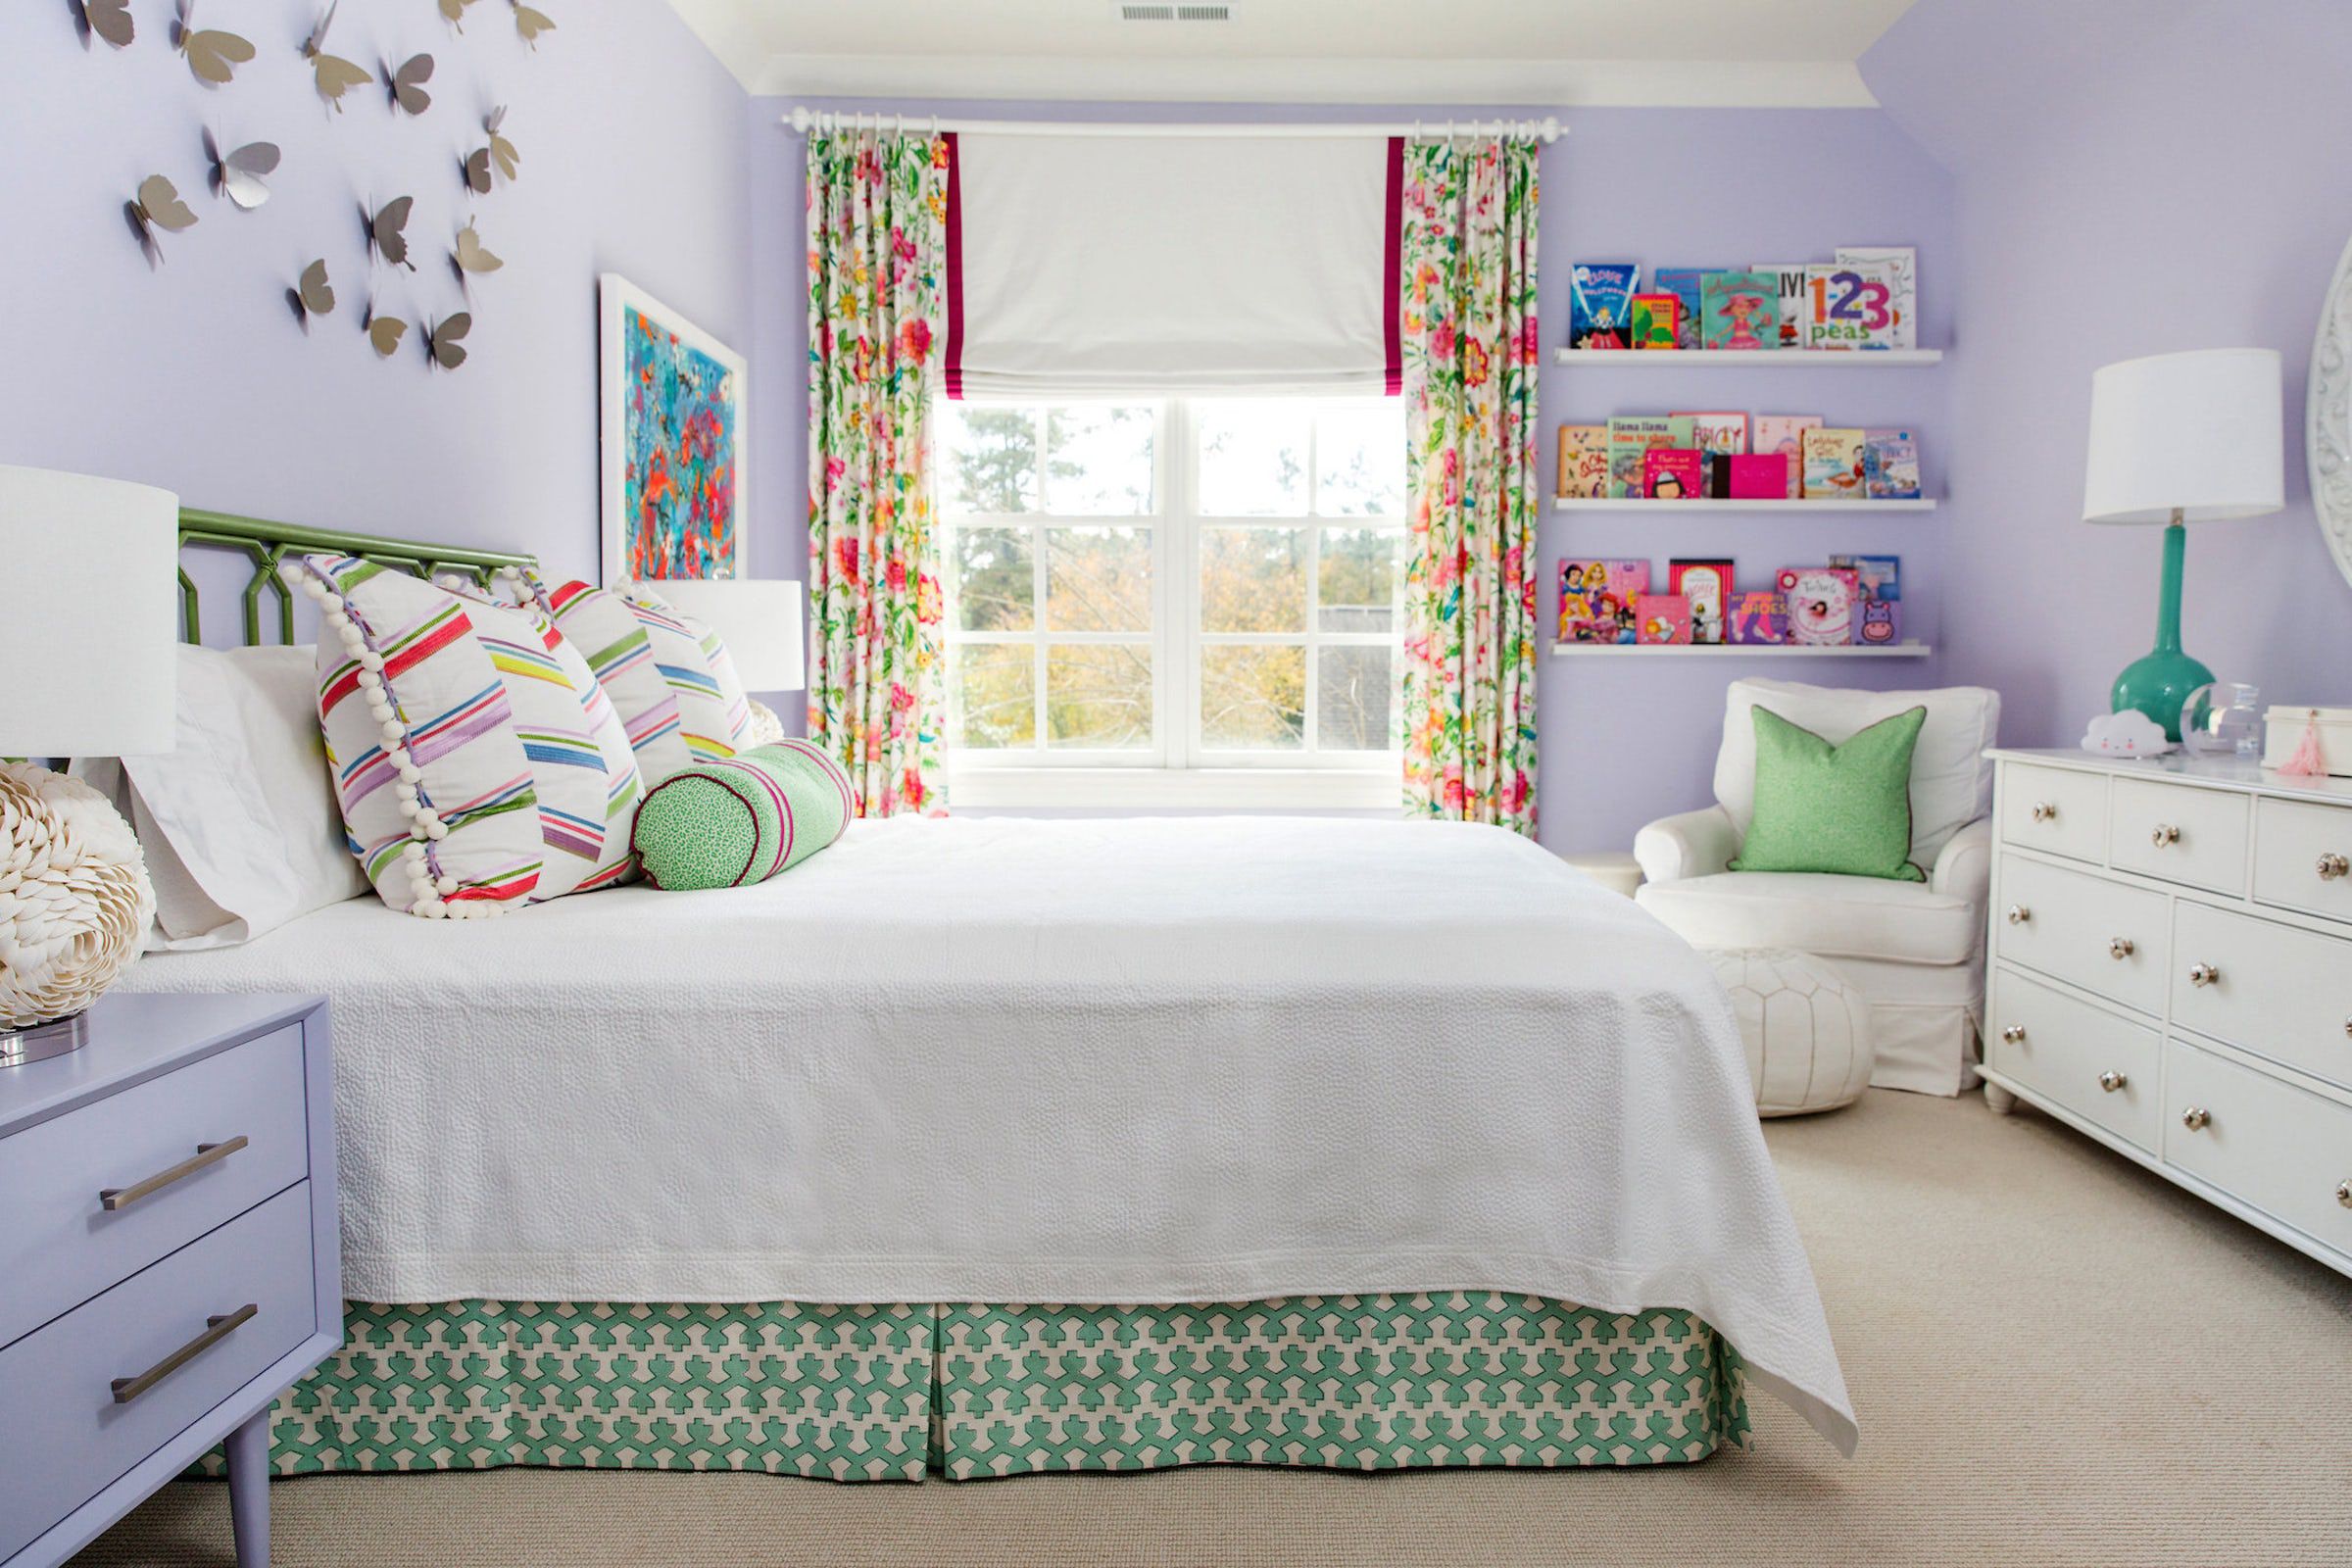 Decorating A Girl's Bedroom